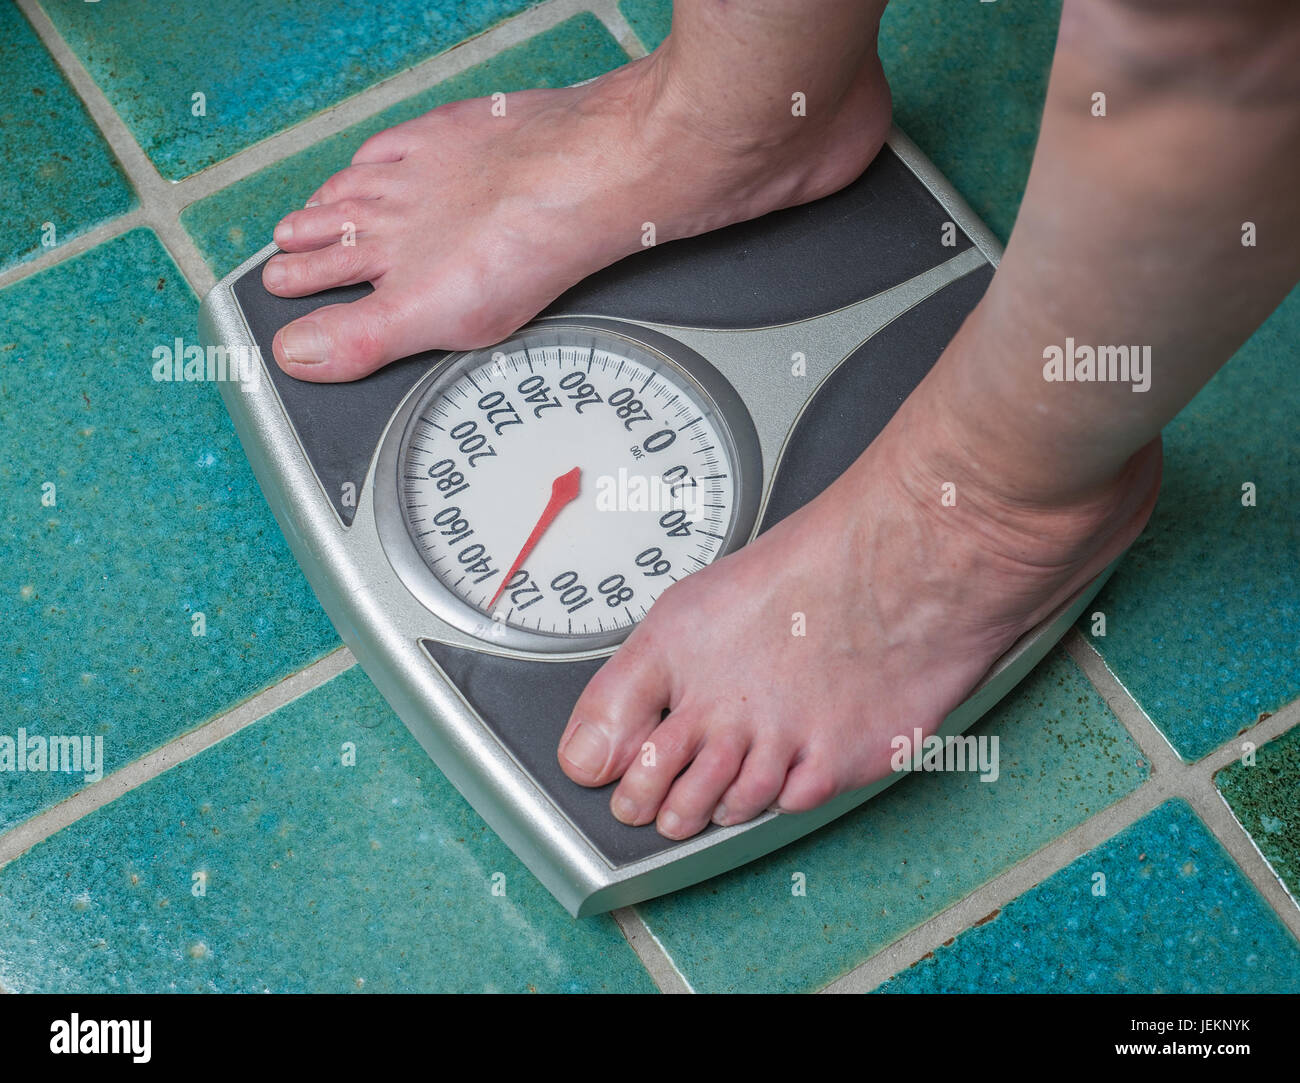 https://c8.alamy.com/comp/JEKNYK/a-normal-weight-person-standing-on-a-bathroom-scale-JEKNYK.jpg